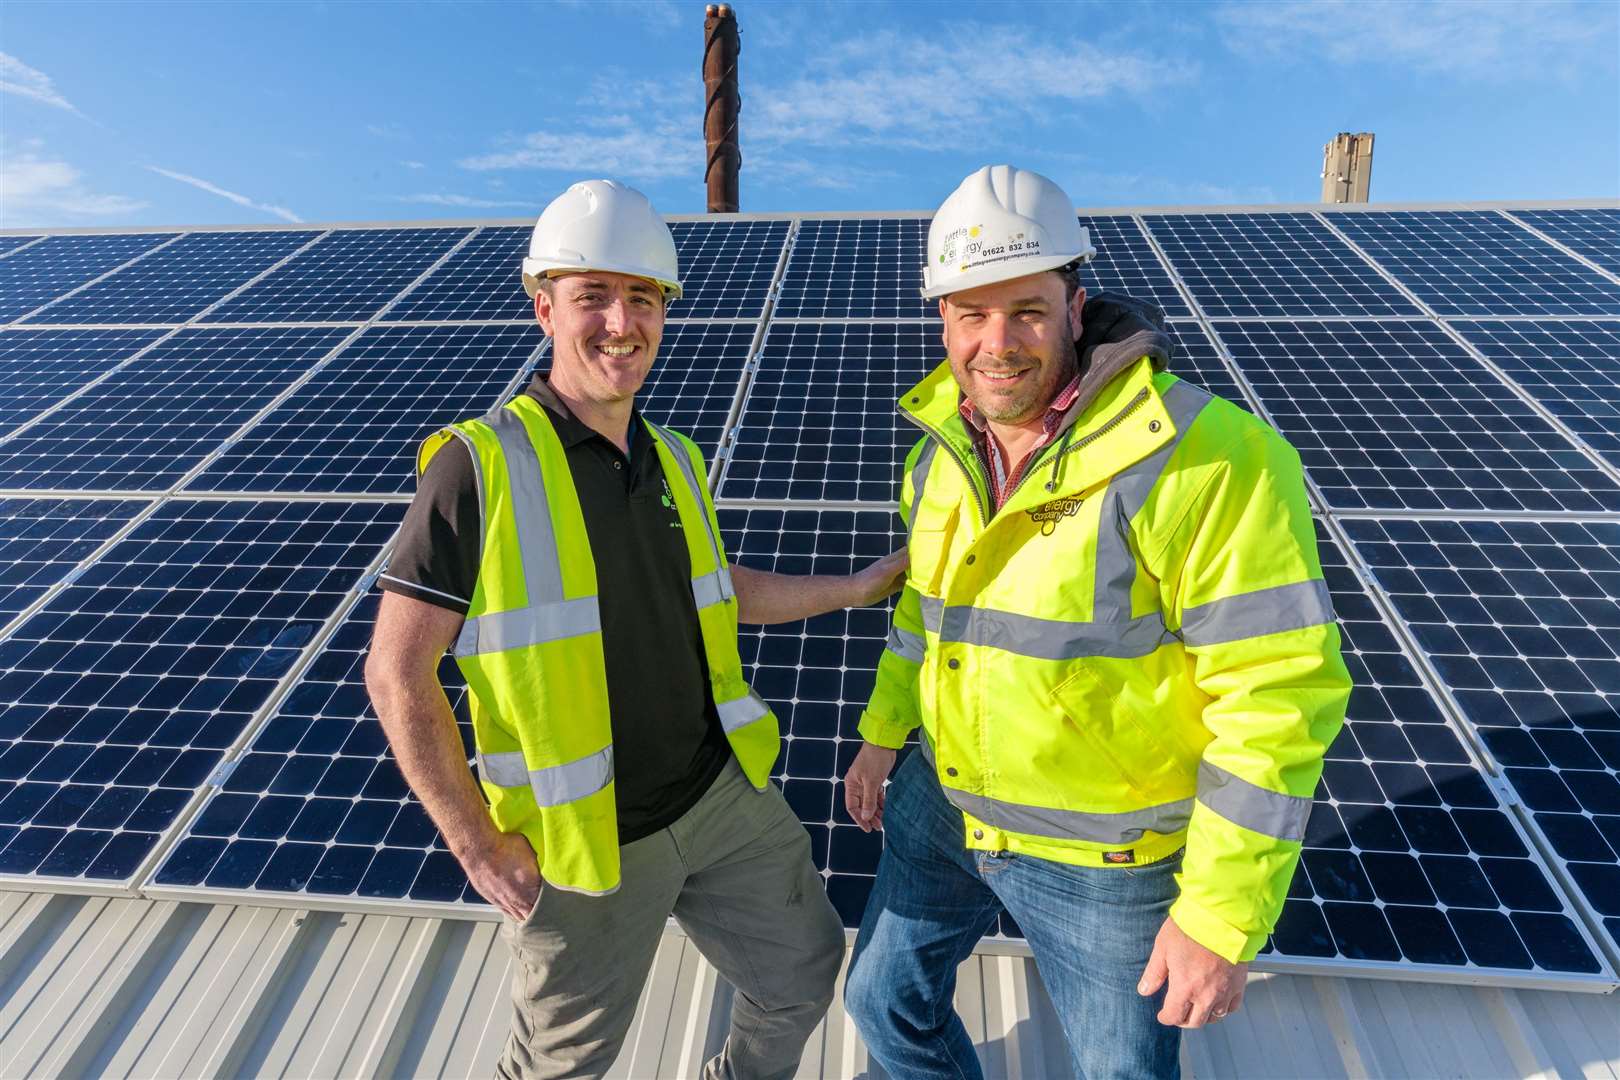 Simon Dudson, right, founder of The Little Green Energy Company, says his firm has doubled in size over the last 12 months